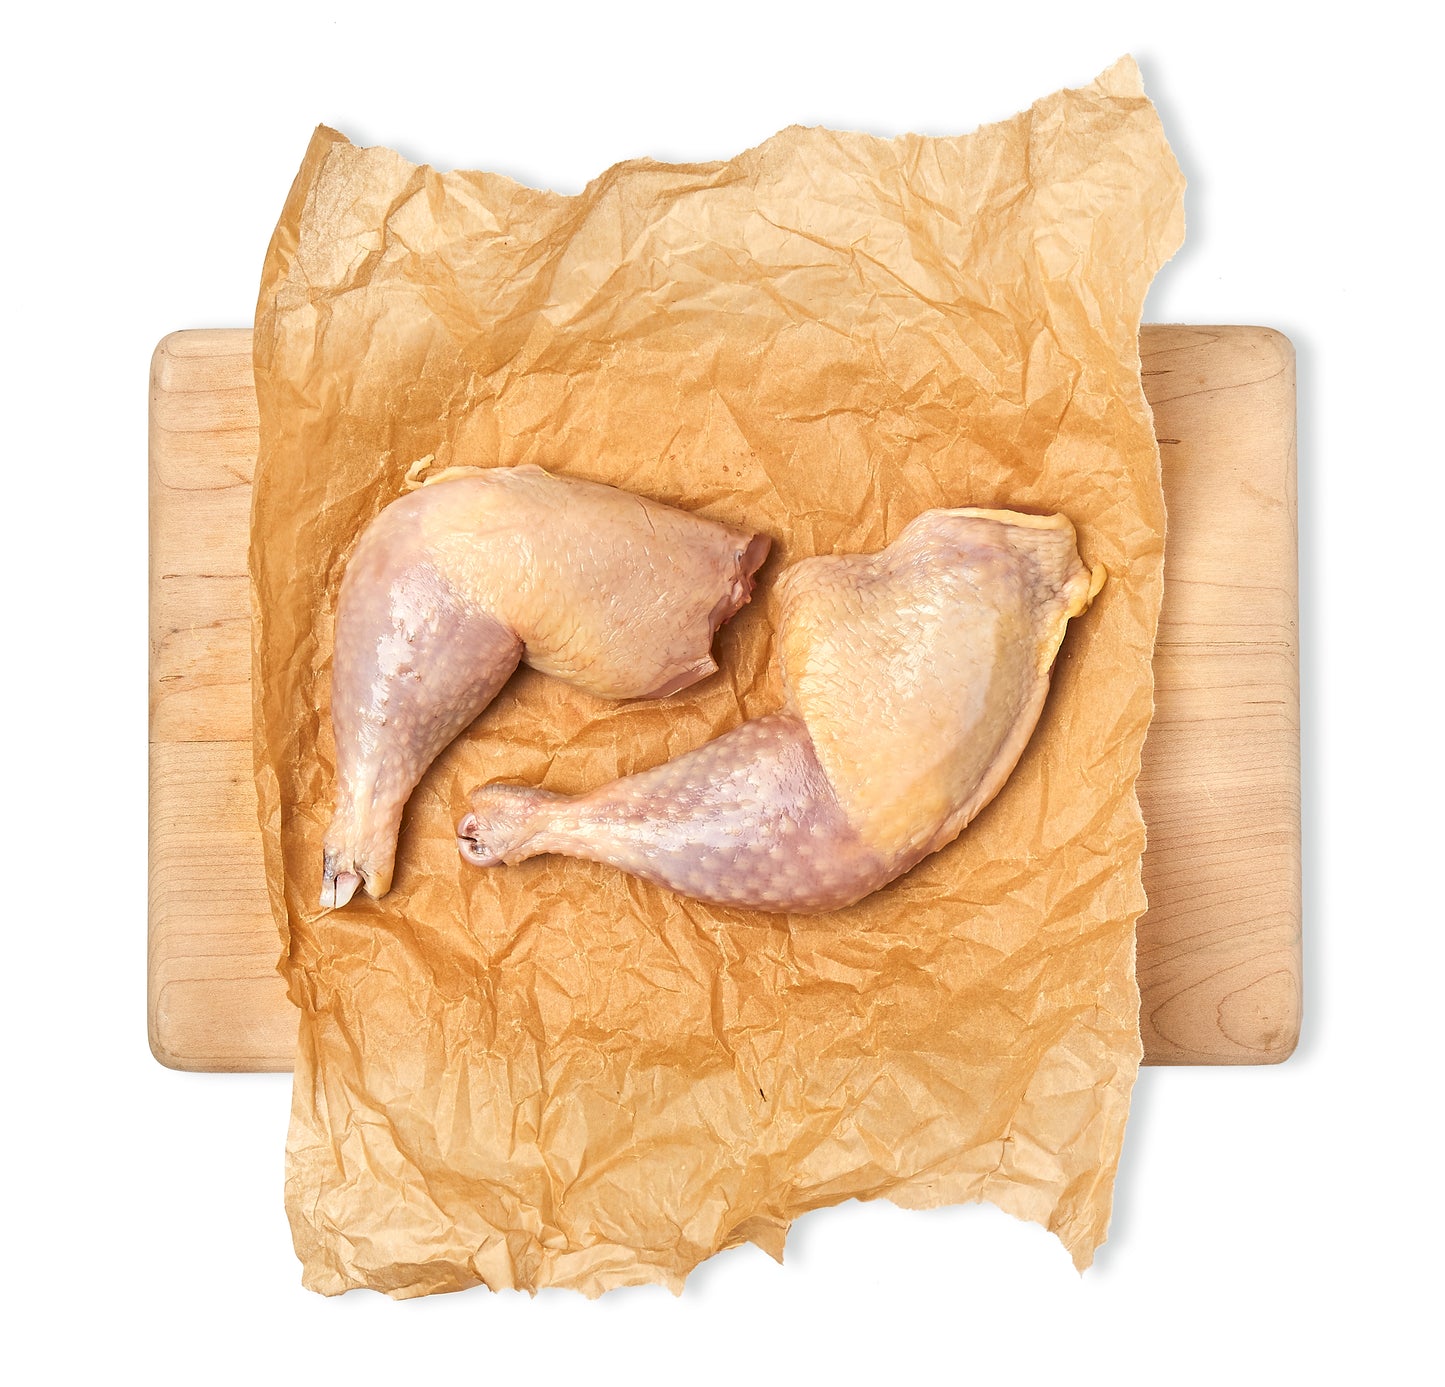 our pasture-raised chicken azuluna foods Premium Pasture-Raised ready-to-eat Meals Delivery